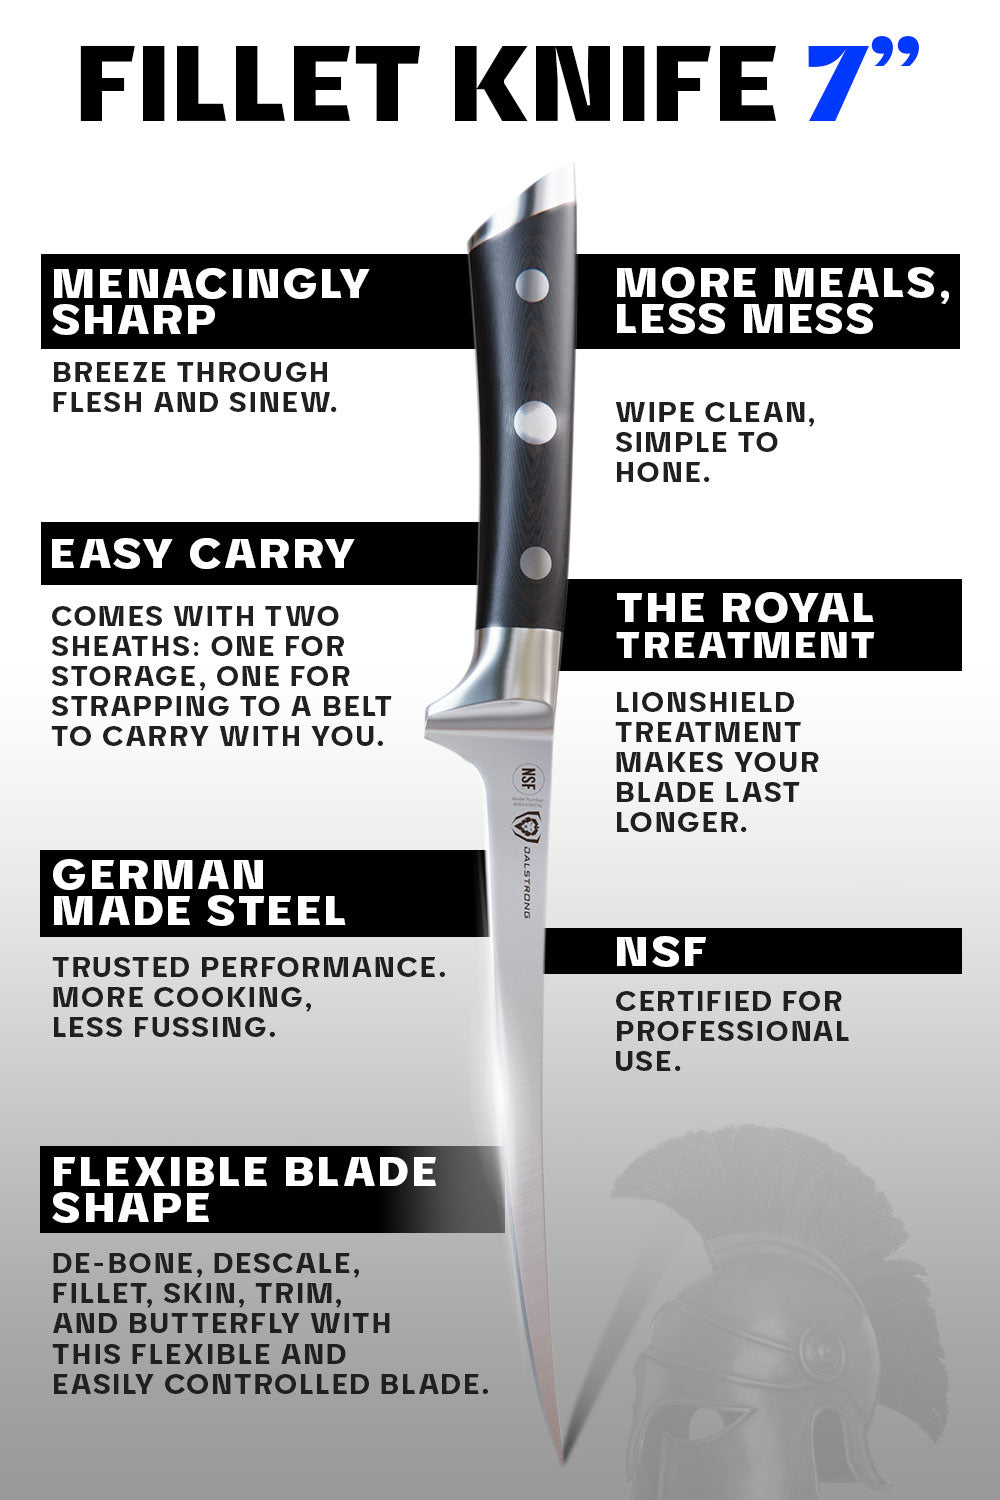 Dalstrong gladiator series 7 inch flexible fillet knife with black handle specification.